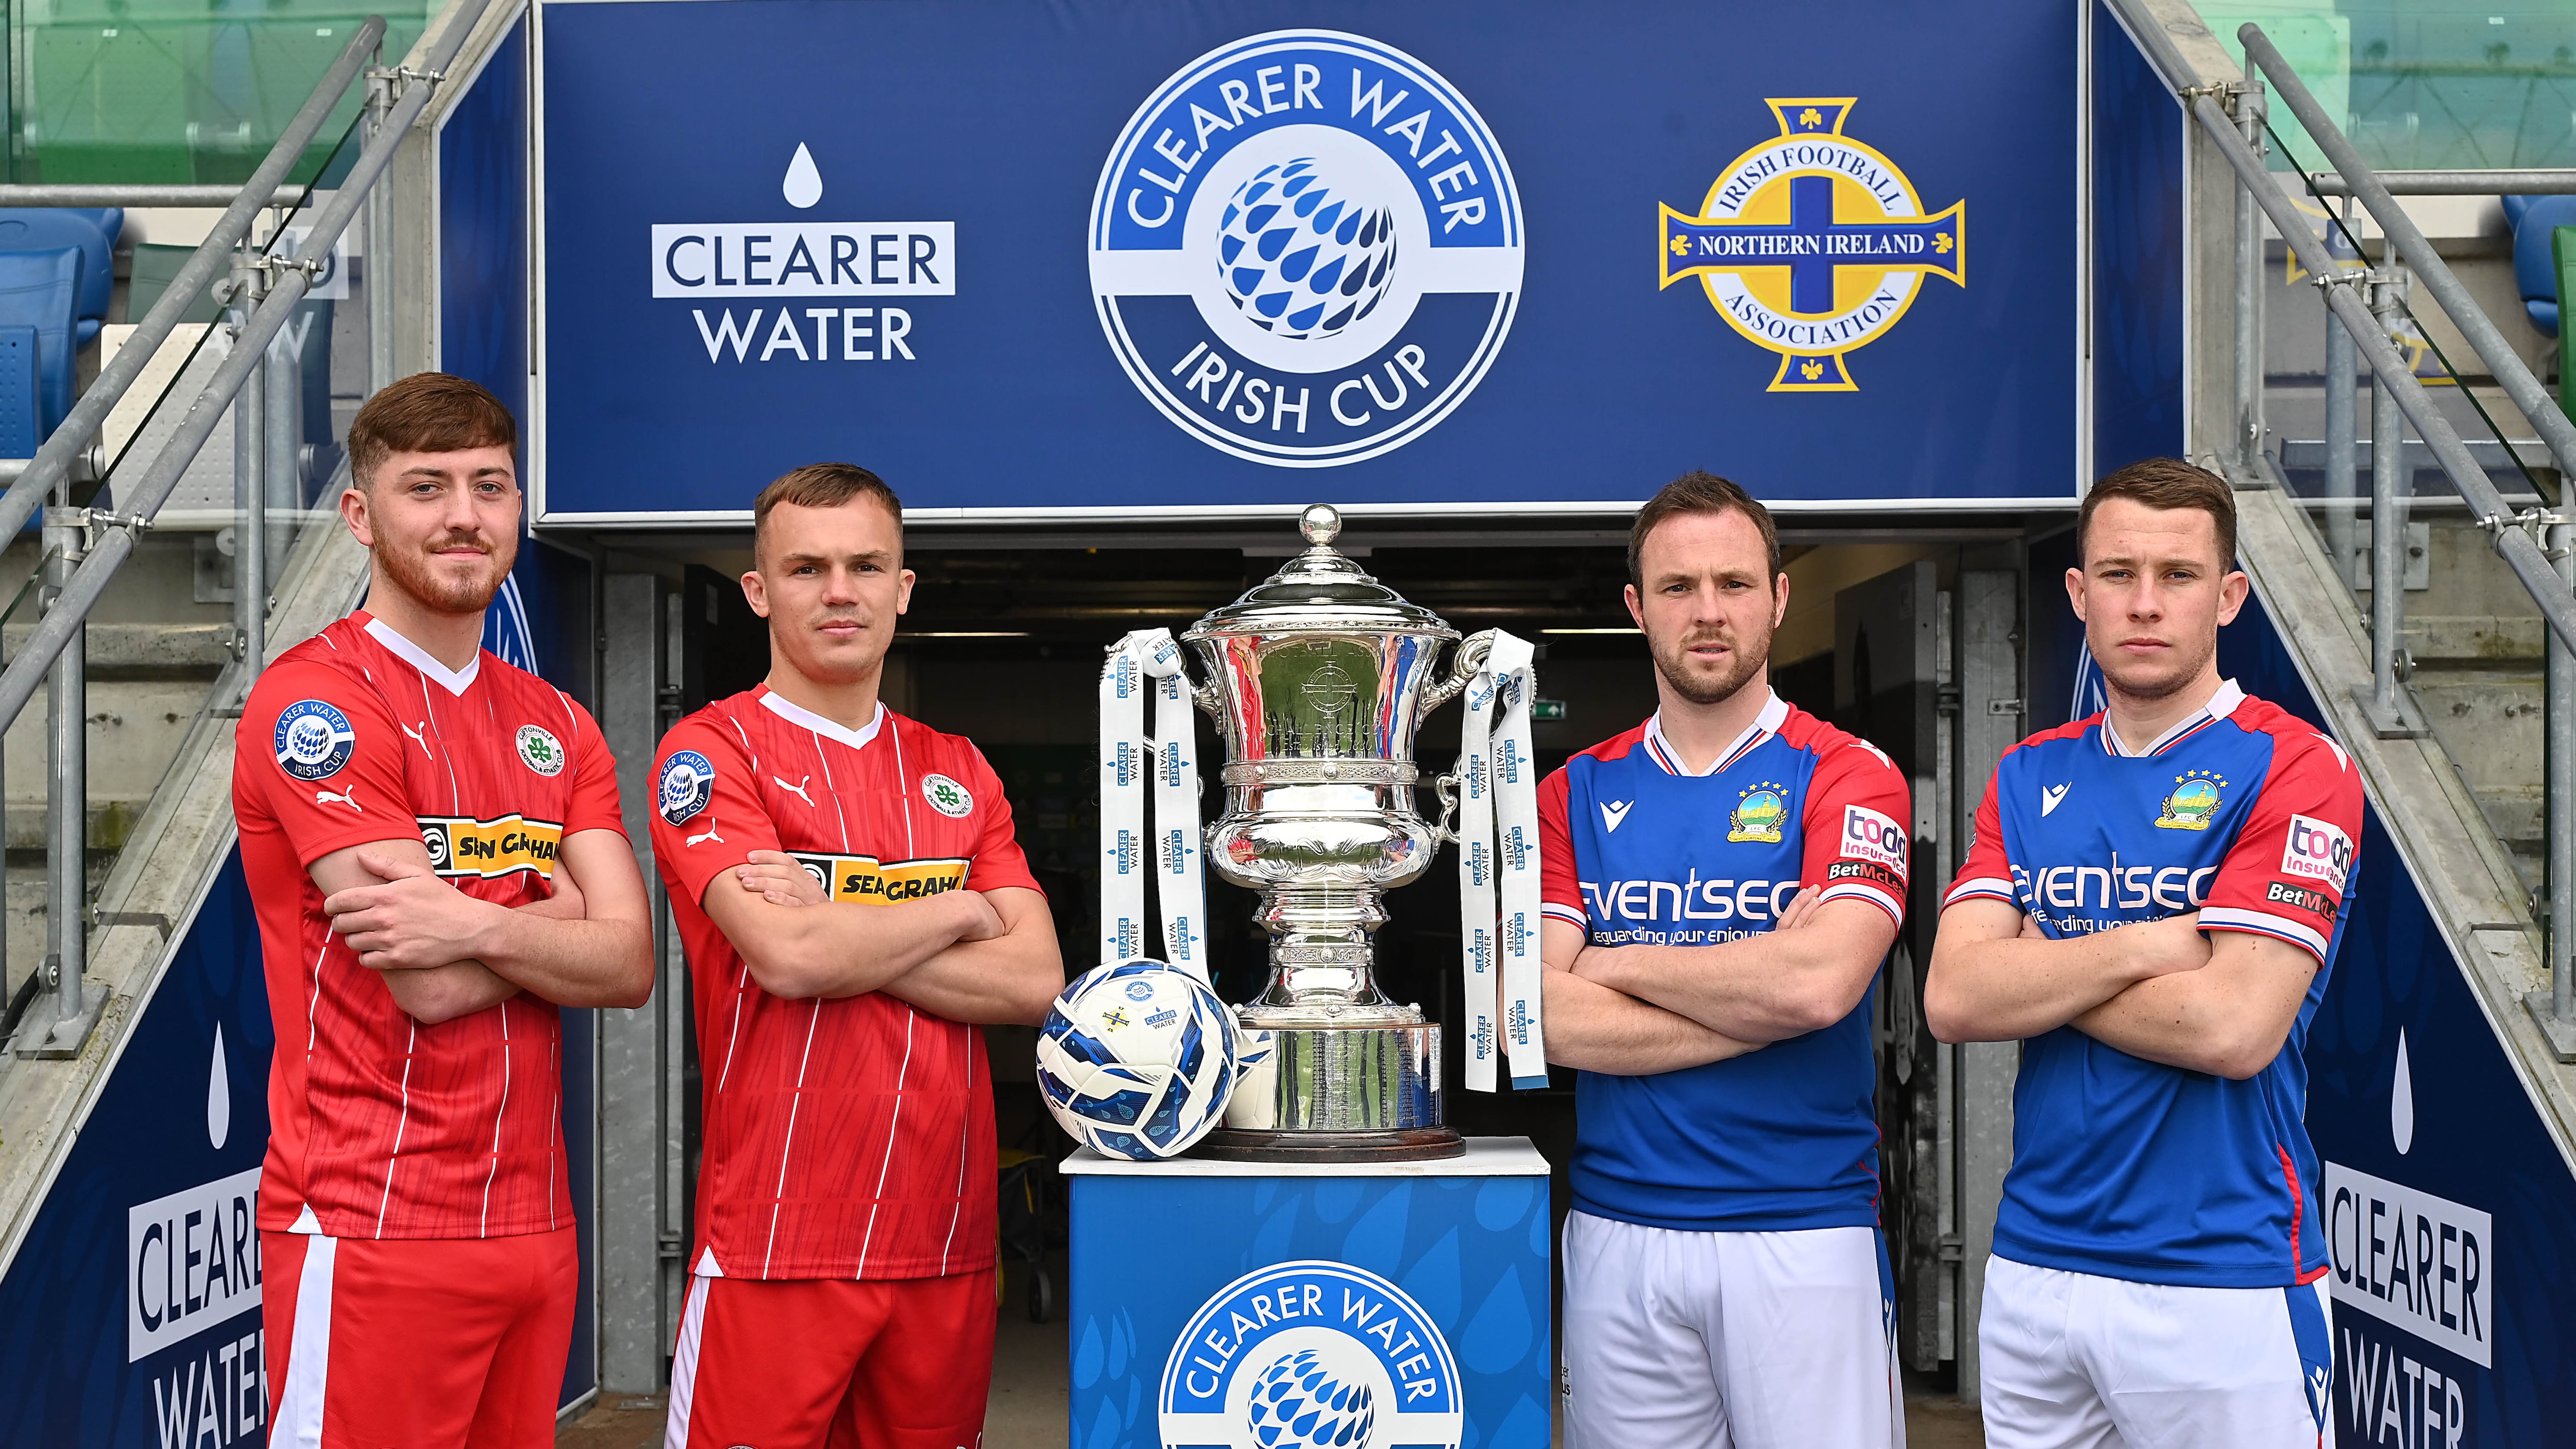 Pacemaker Press. 24-04 2024: Press conference ahead of this seasons Clearer Water Irish Cup Final between Cliftonville and Linfield at the National Football Stadium at Windsor Park in Belfast.
Linfields Jamie Mulgrew and Kyle McClean pictured with  Cliftonvilles Rory Hale and Sean Stewart.
Picture By: Arthur Allison/Pacemaker Press.